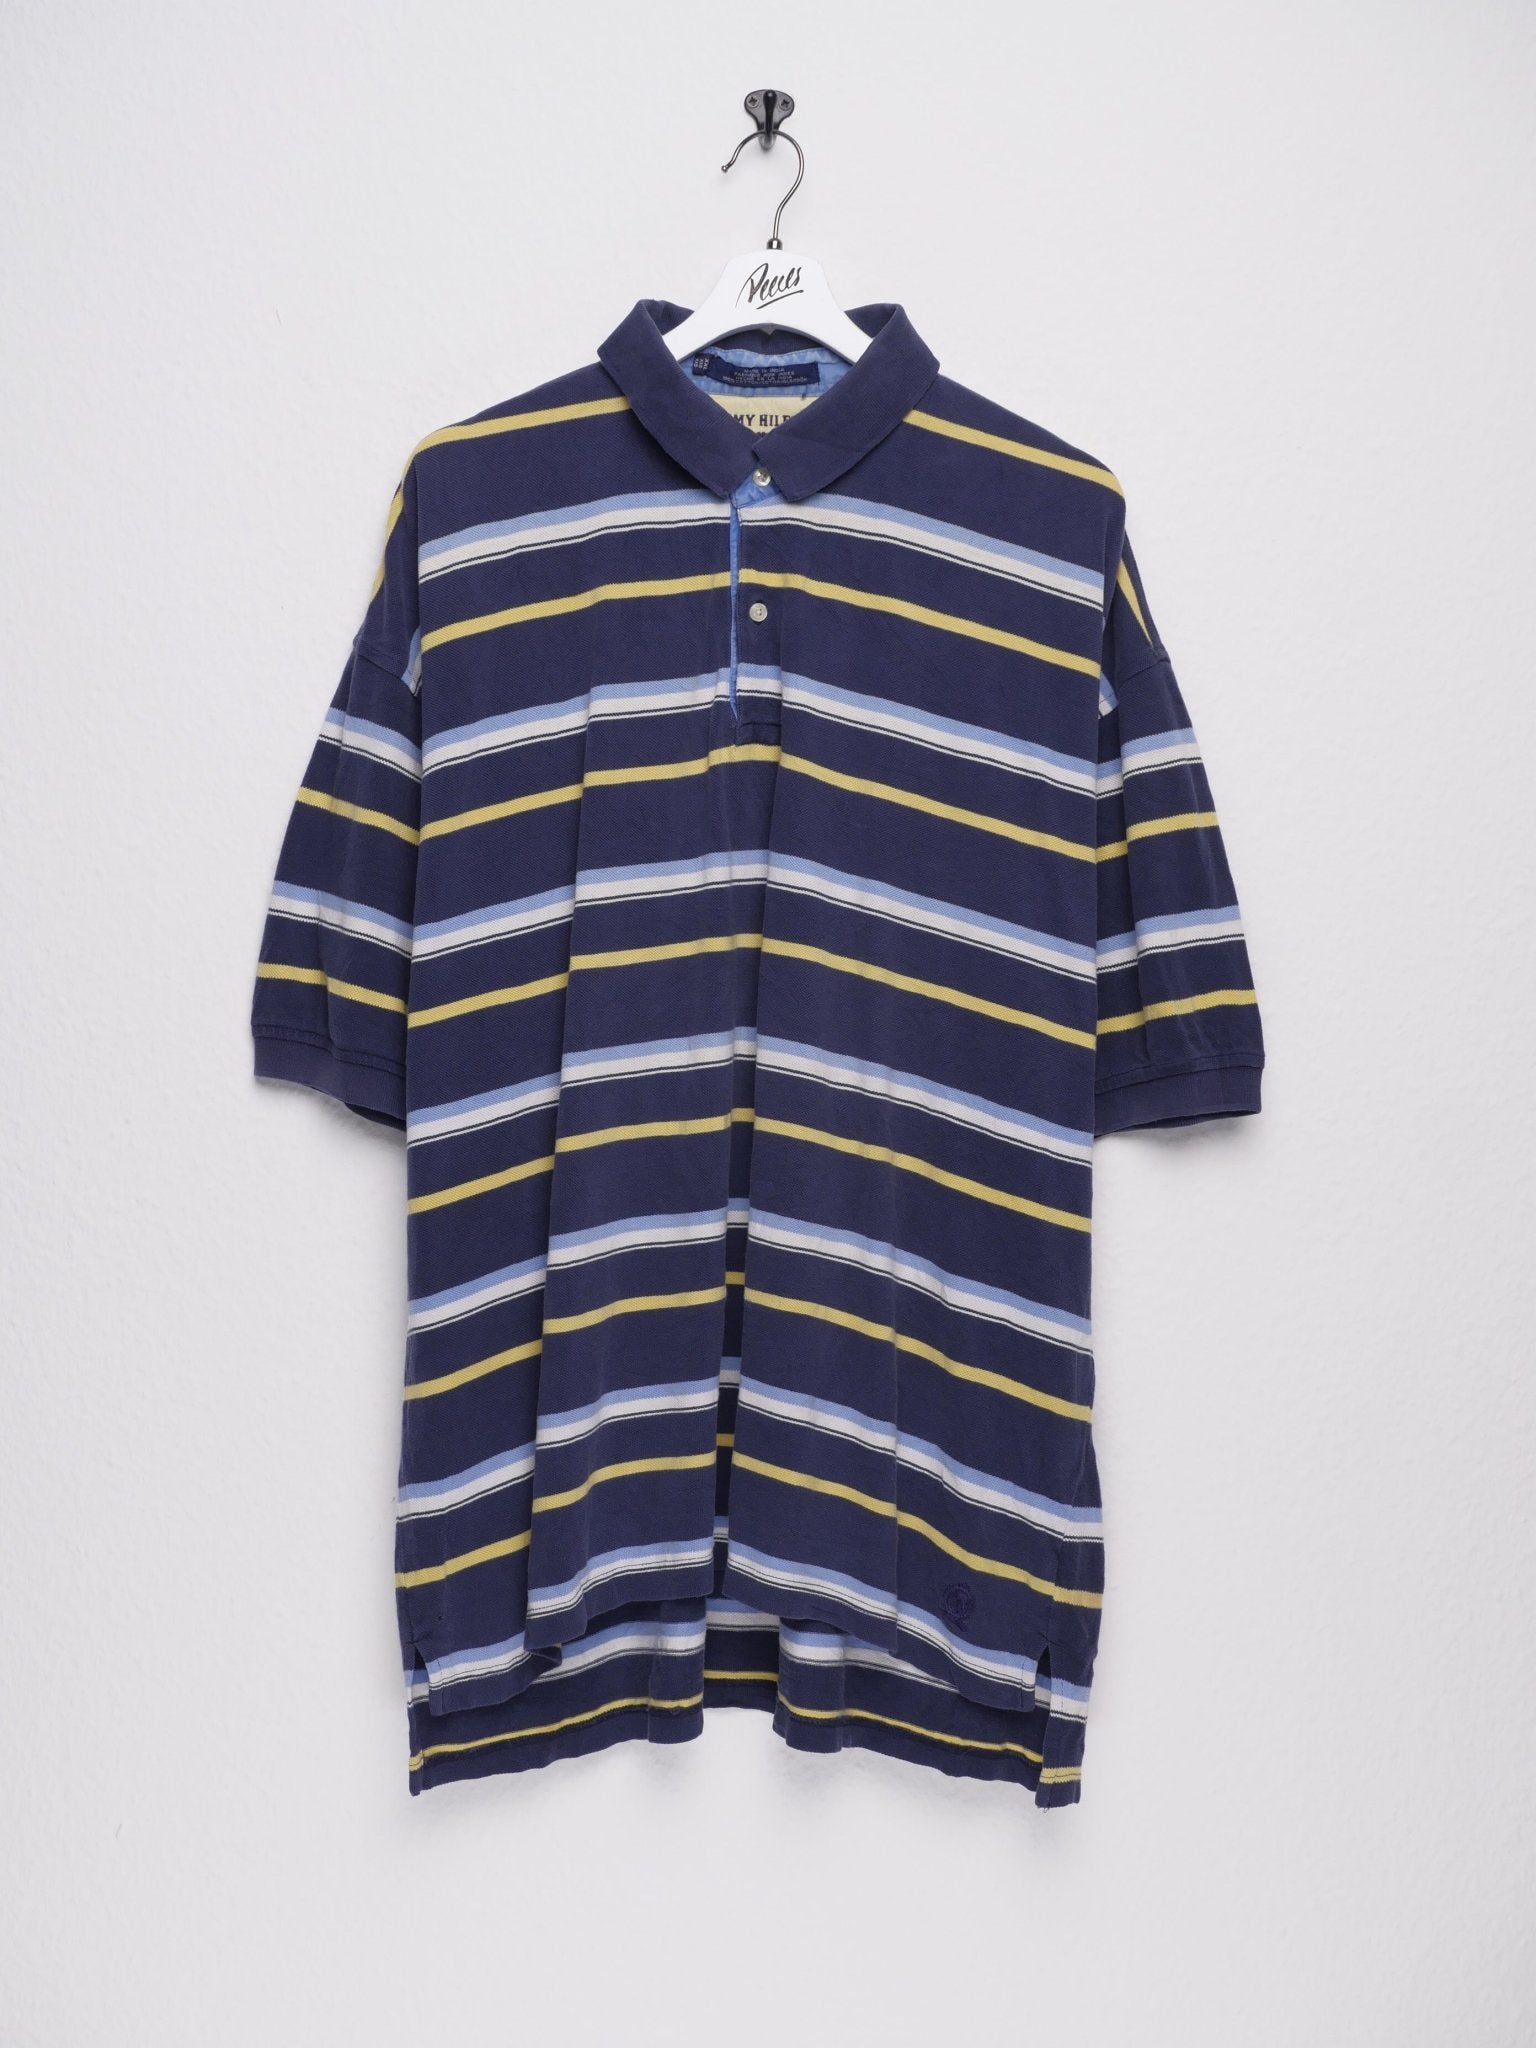 tommy Hilfiger embroidered old Crest Logo striped S/S Polo Shirt - Peeces